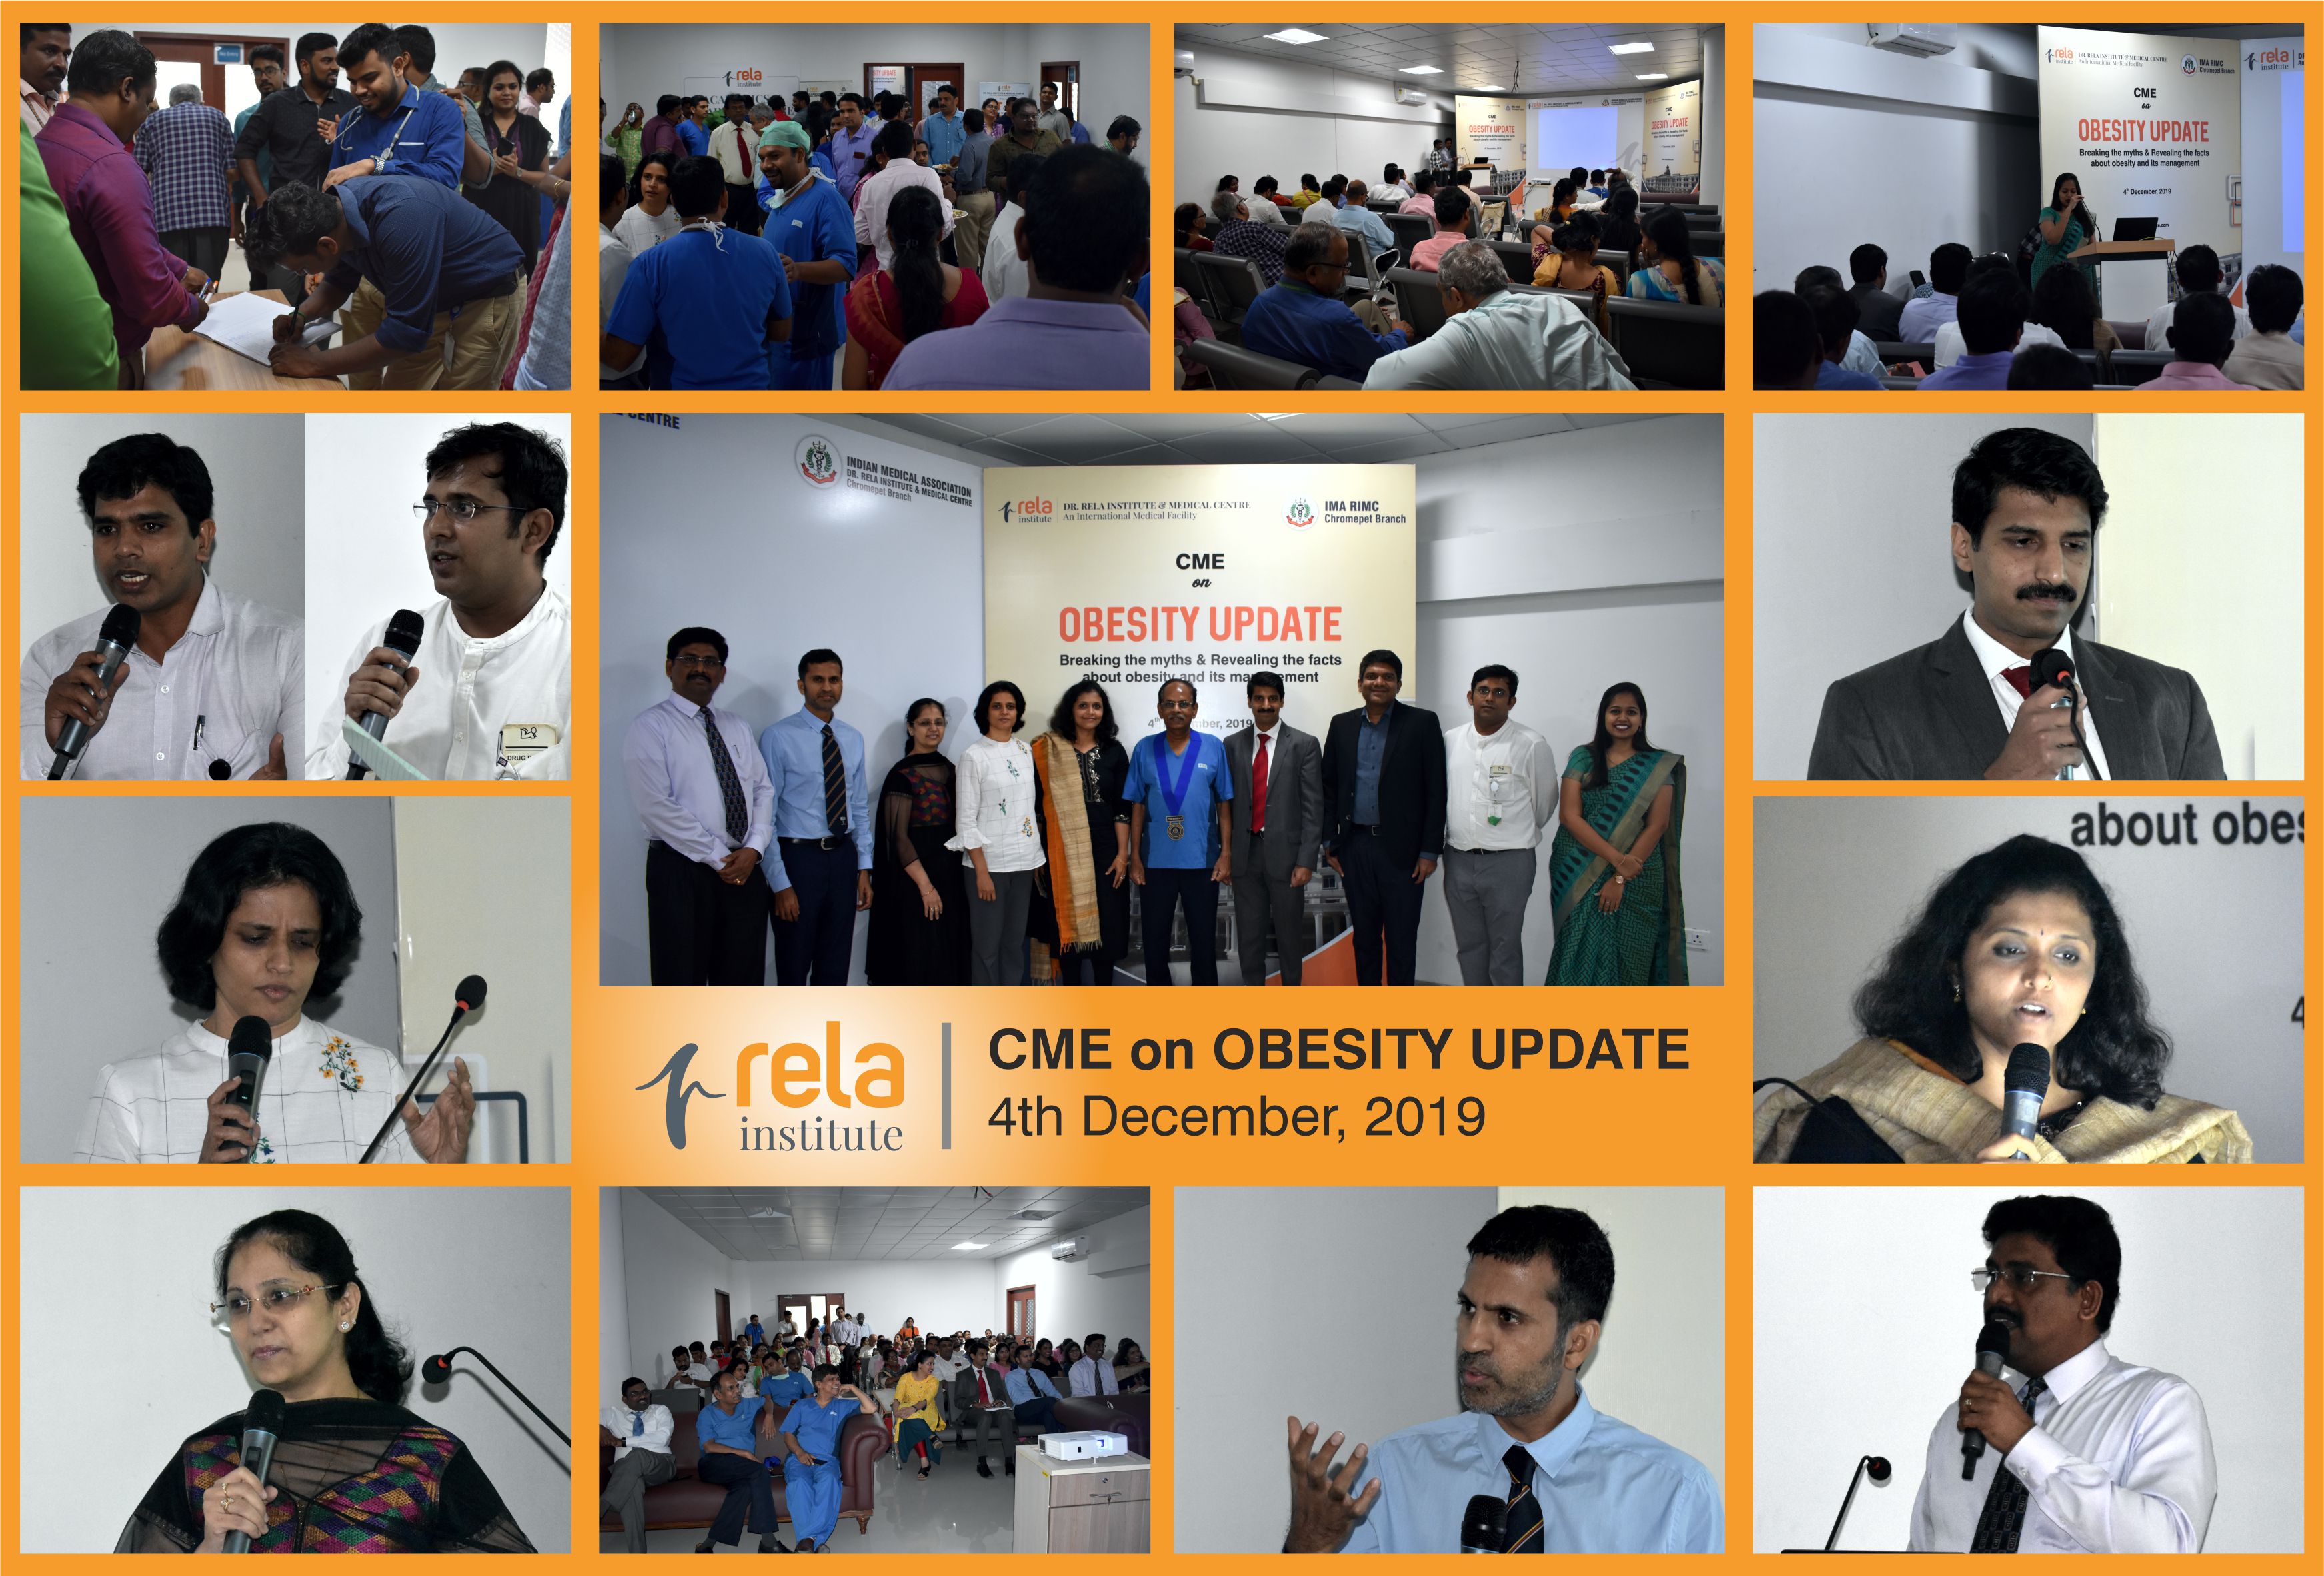 CME on Obesity Update